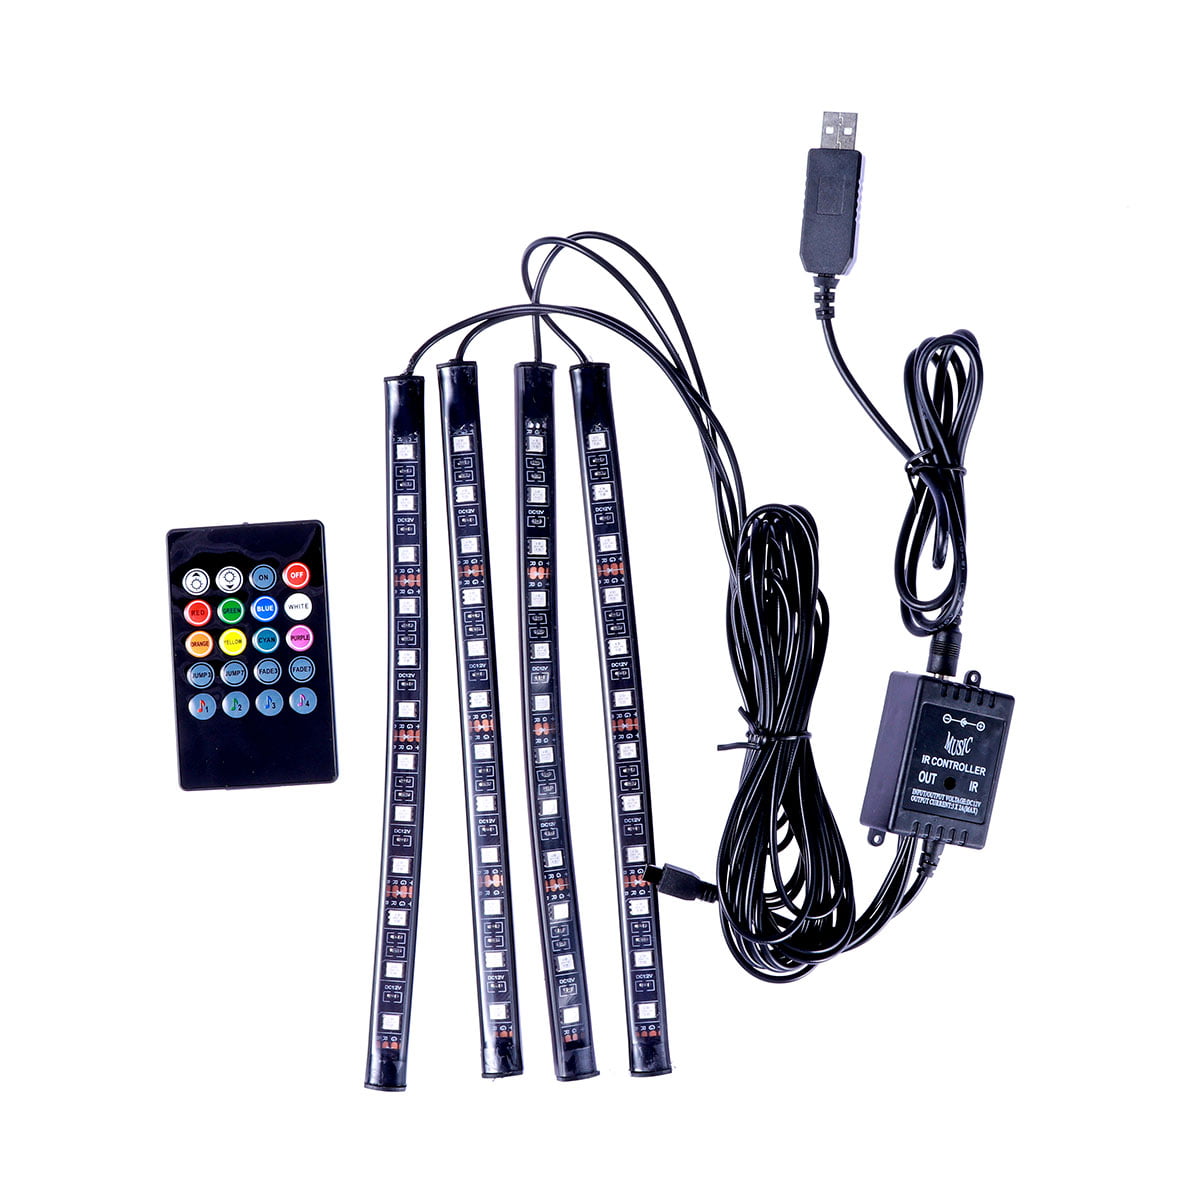 Car Atmosphere Neon Lights Foot Strip 9LED Wireless music control 7color RGB kit